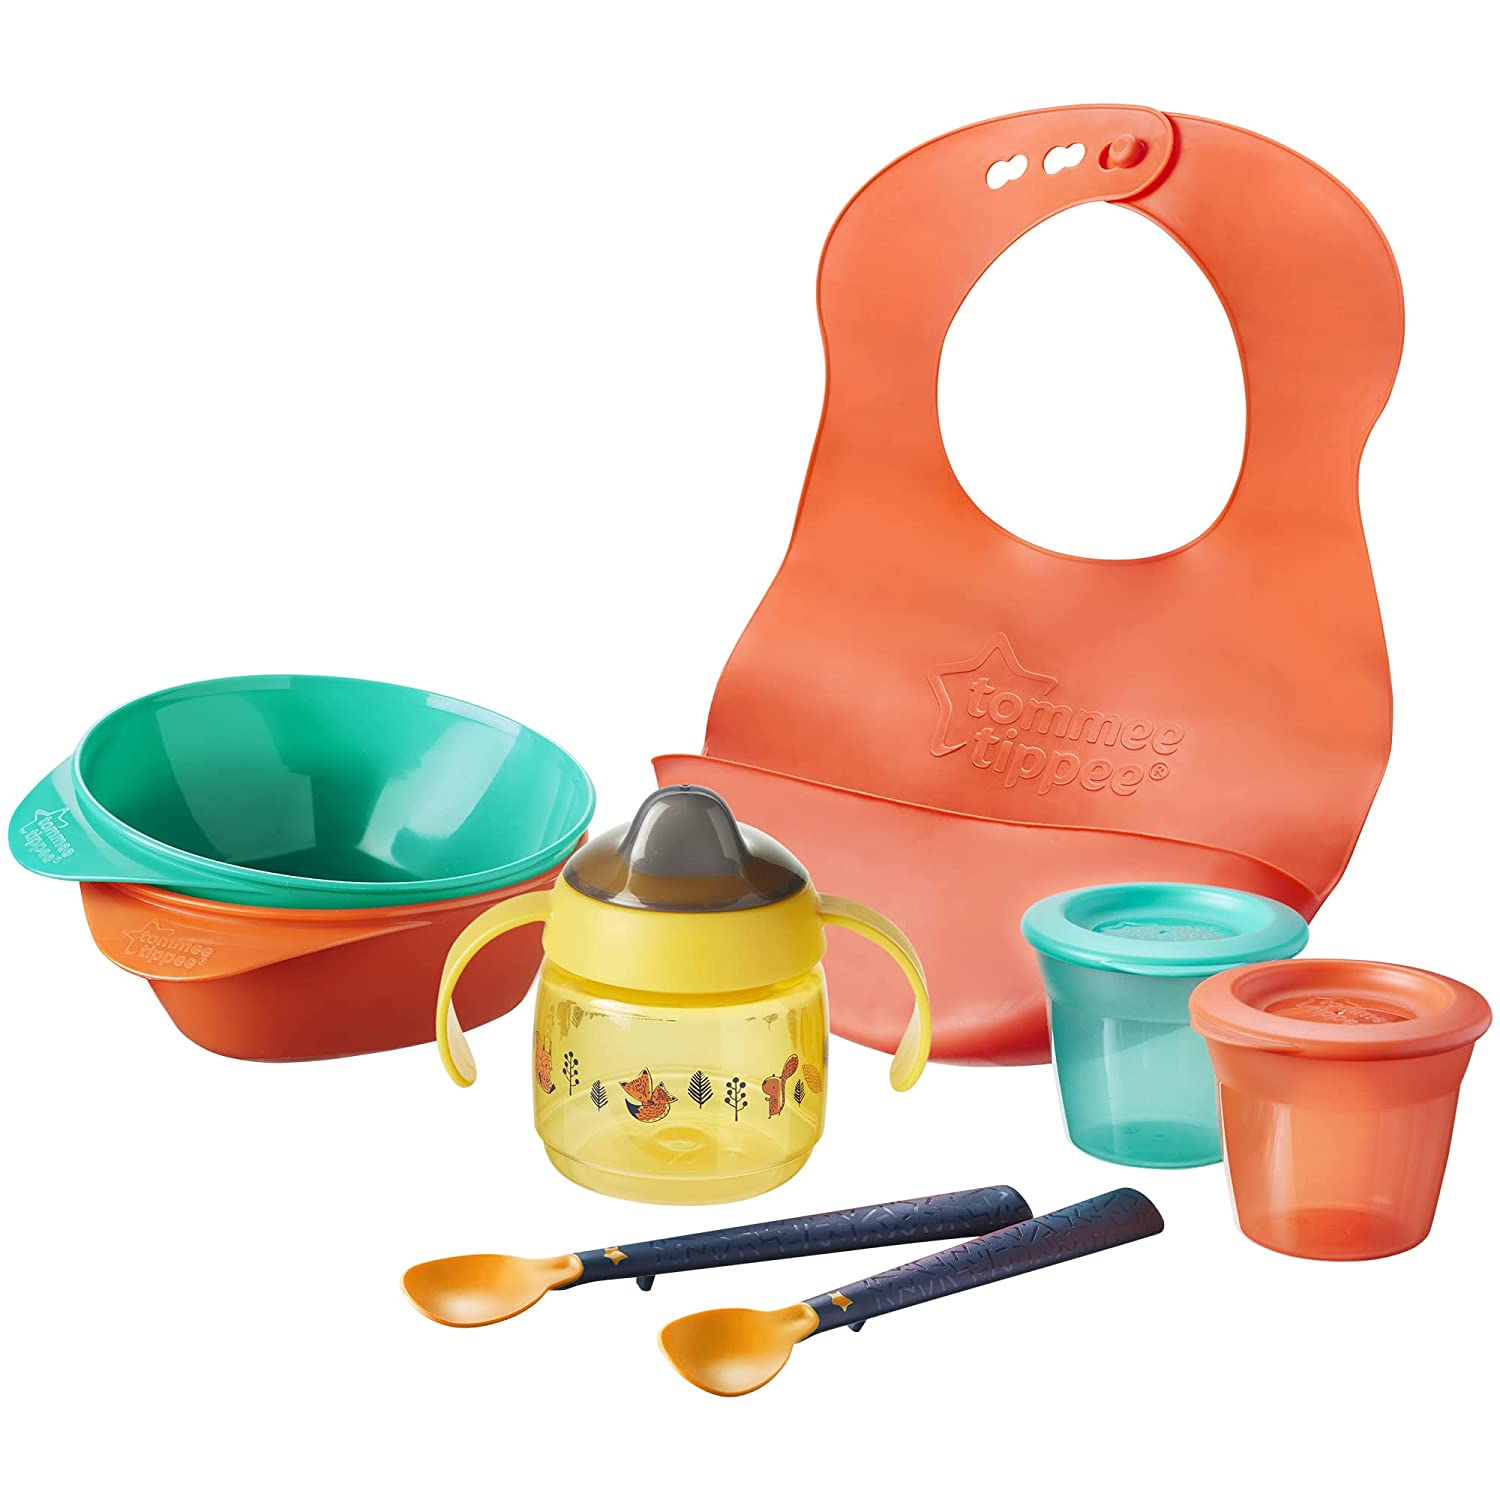 Tommee Tippee Toddler Weaning Set with Bowls and Spoons, Silicone Bibs, 100% Leak-proof Drinking Cups and Food Containers, from 4 Months